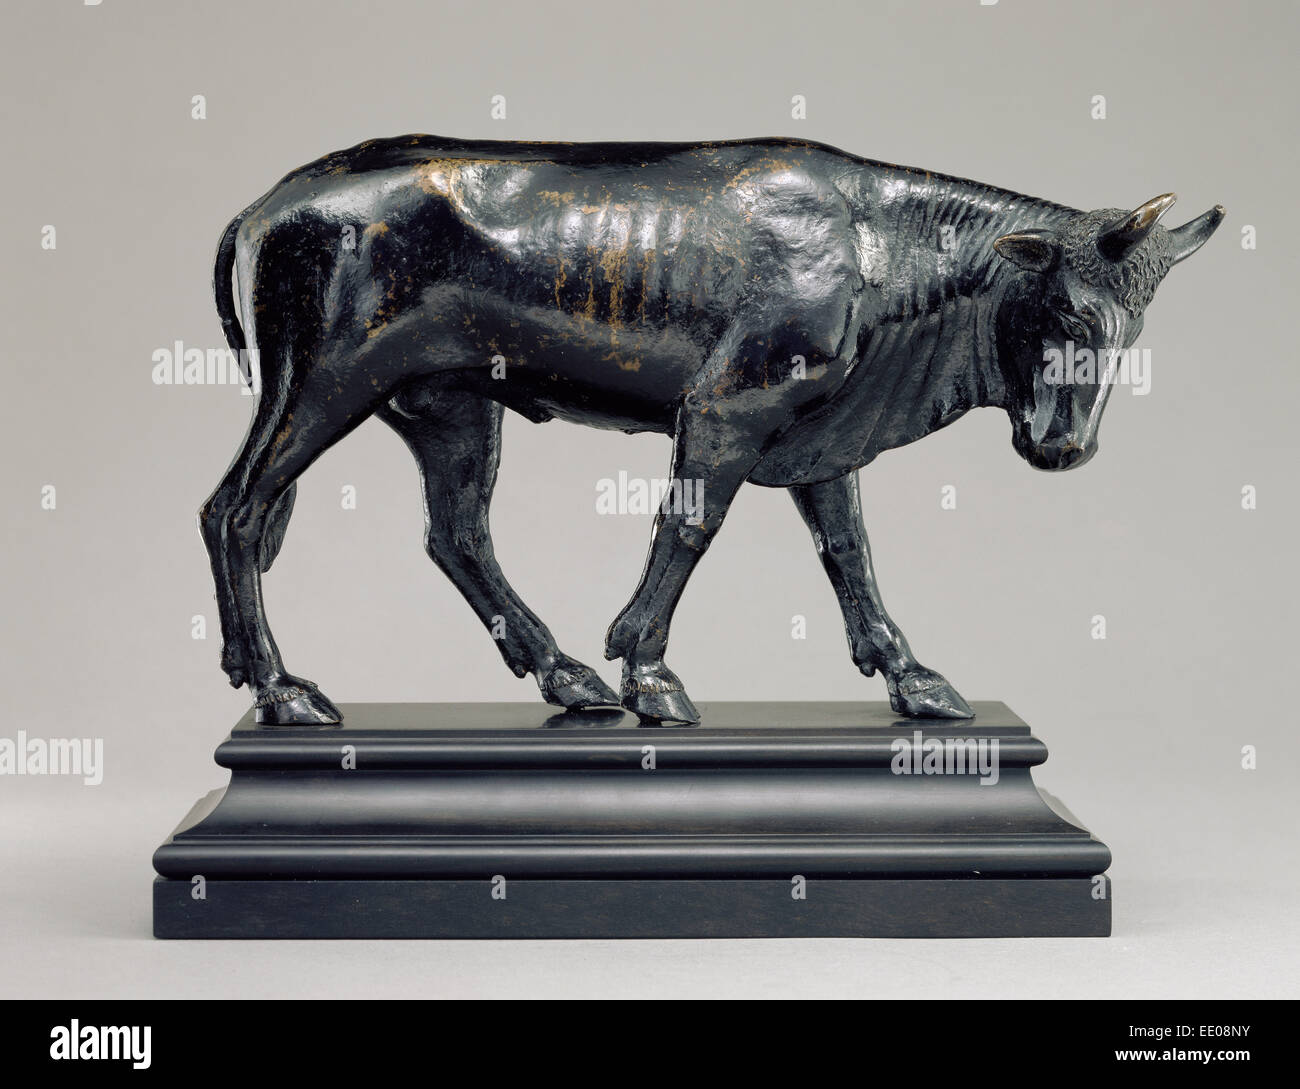 Bull with Lowered Head; Unknown maker, Italian; Venice, Italy, Veneto, Europe; about 1510 - 1525; Bronze Stock Photo